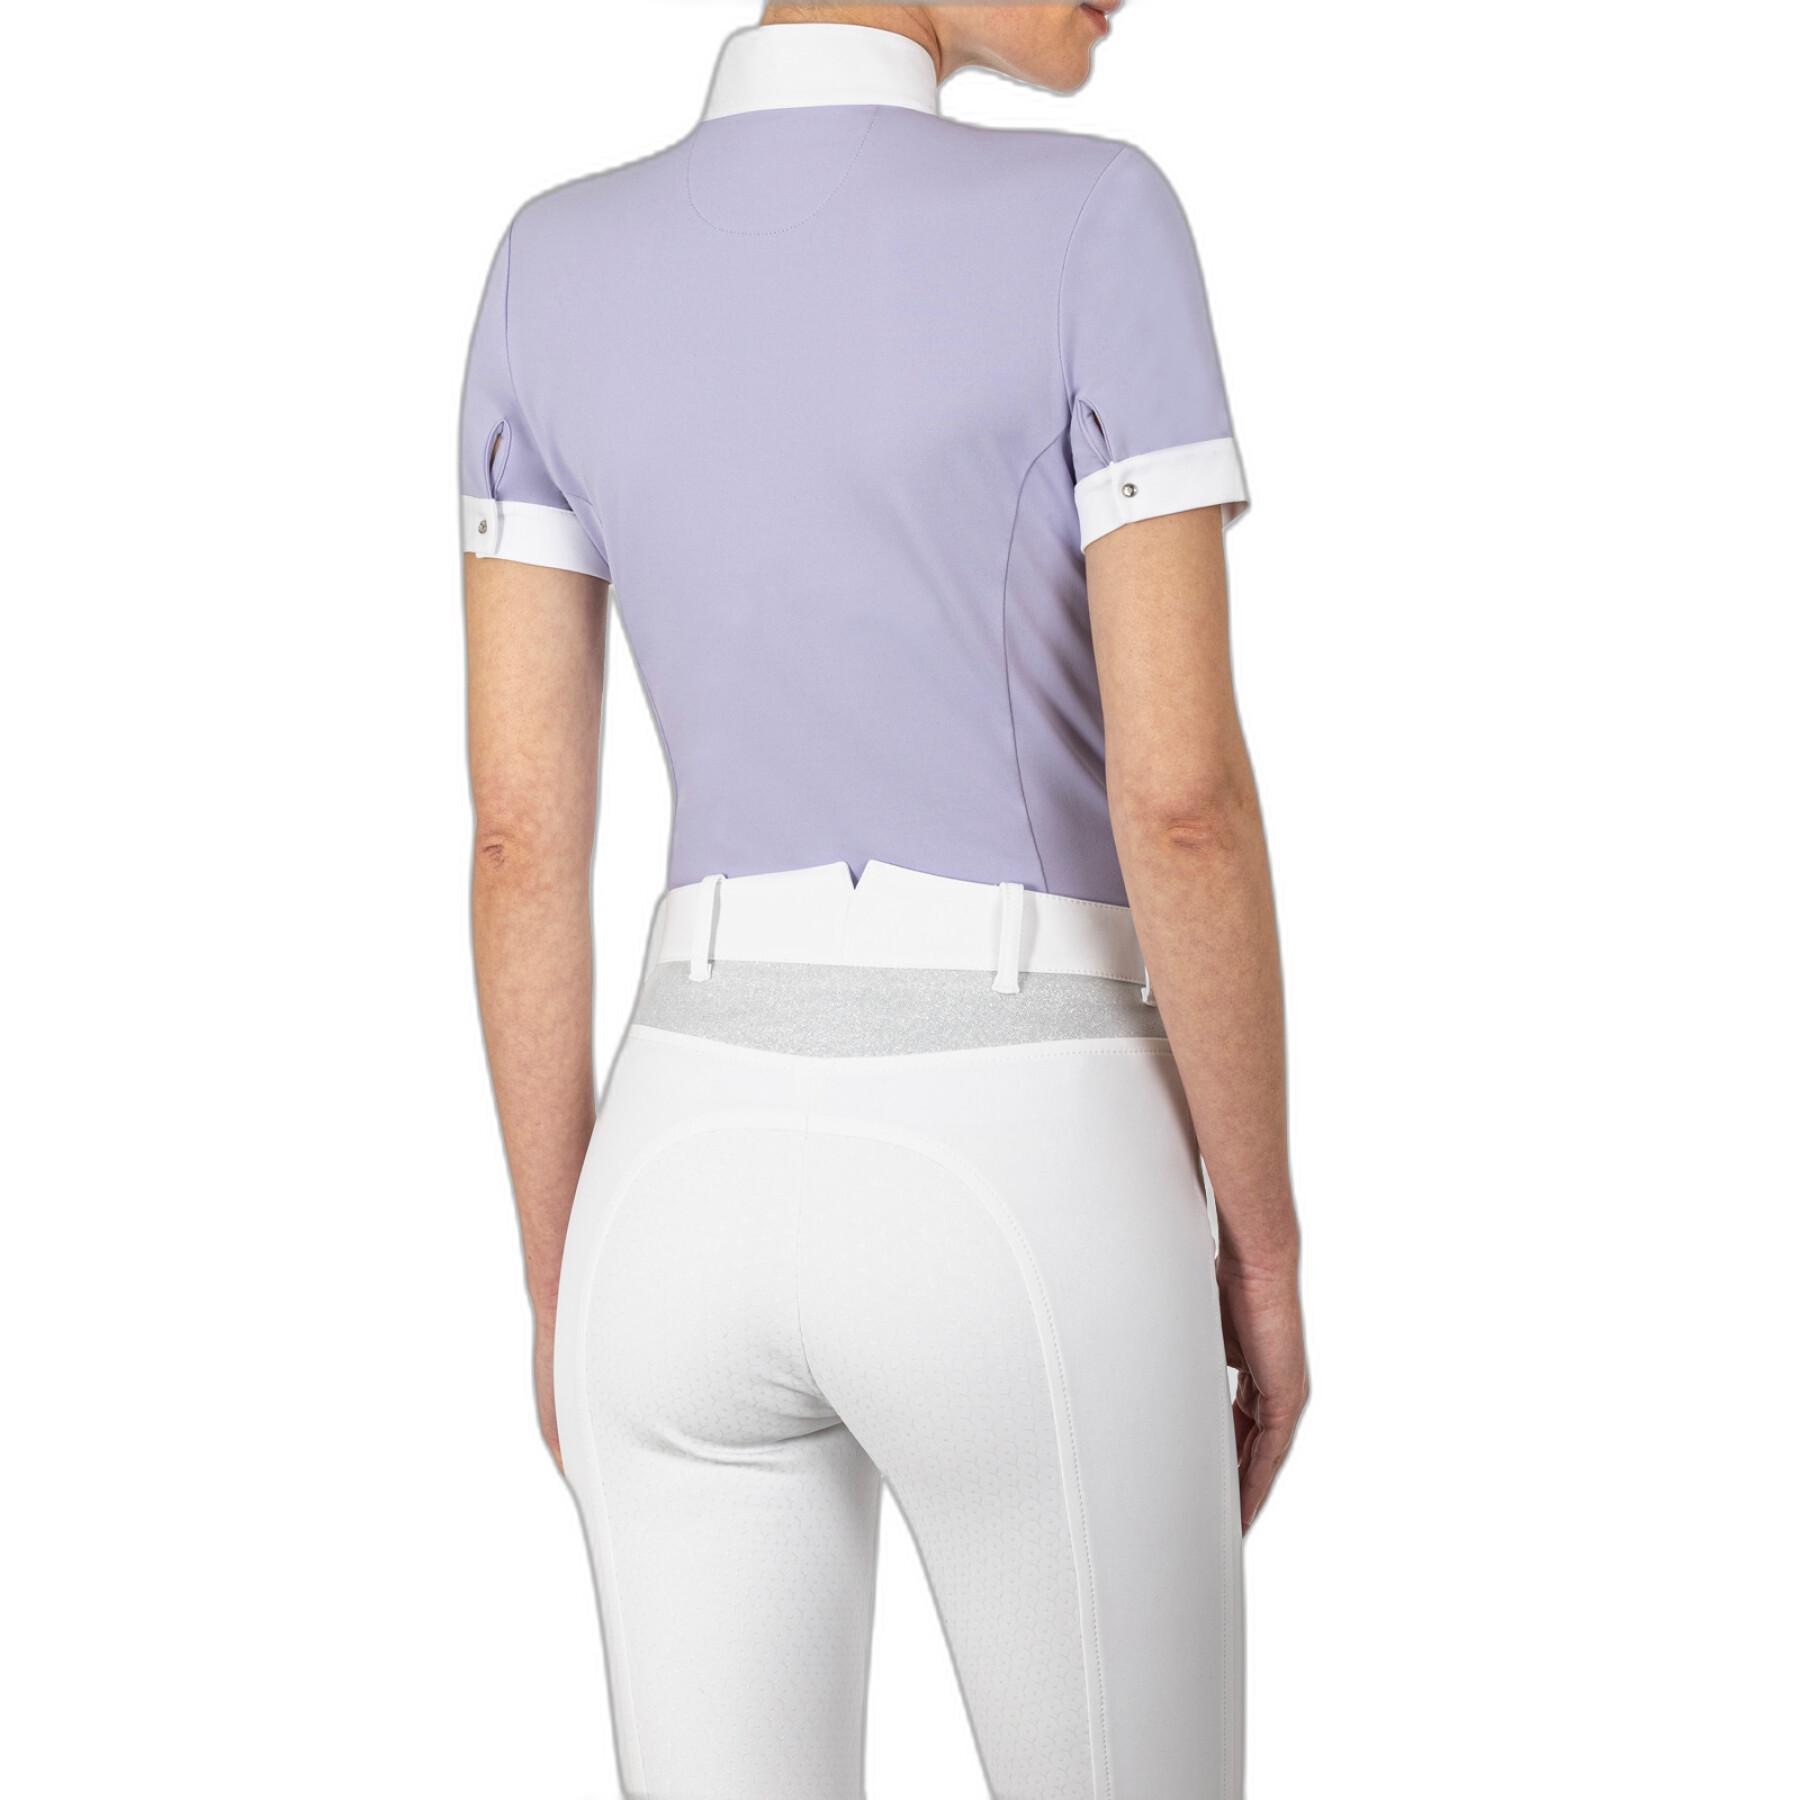 Women's riding competition polo shirt Equiline Gardug